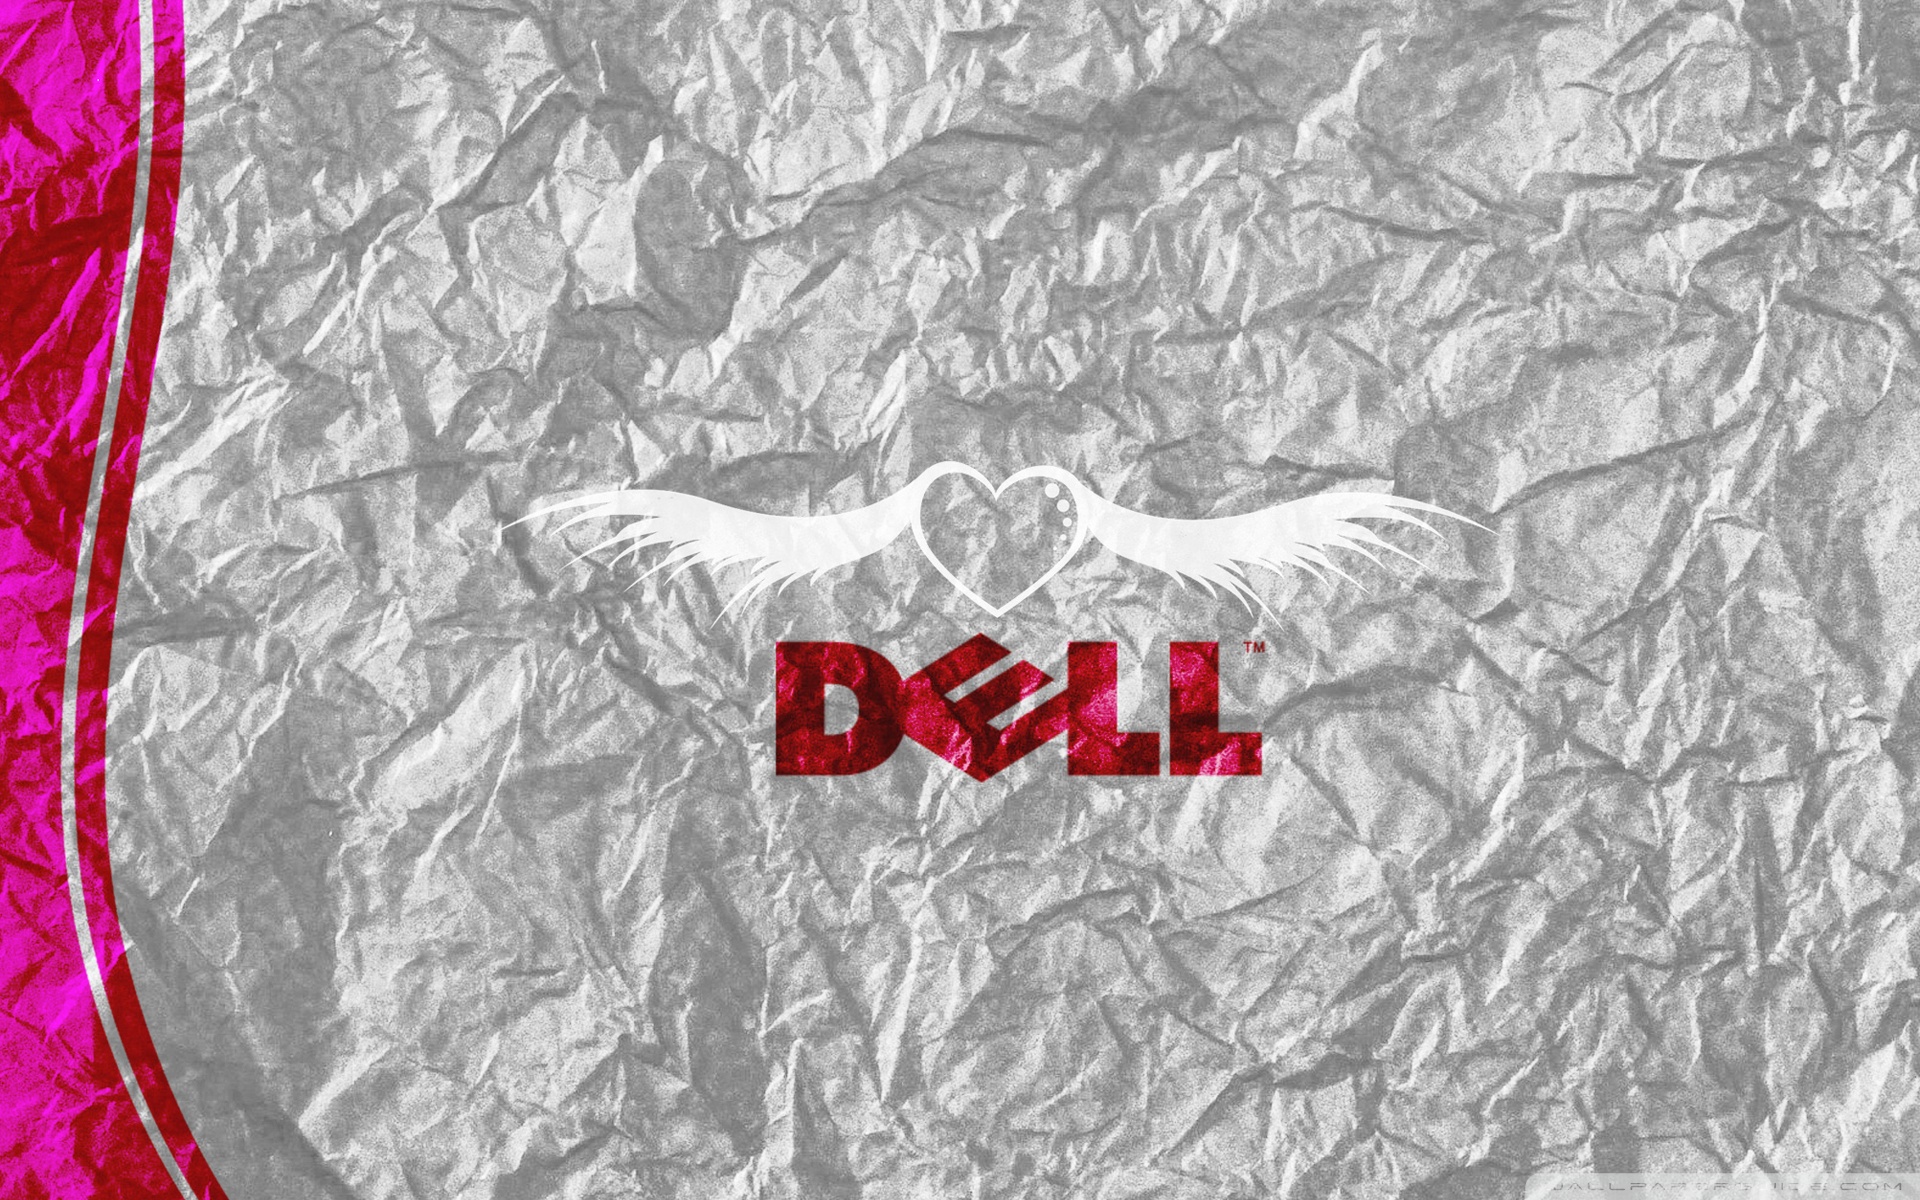 Top 999+ Dell Wallpaper Full HD, 4K✓Free to Use